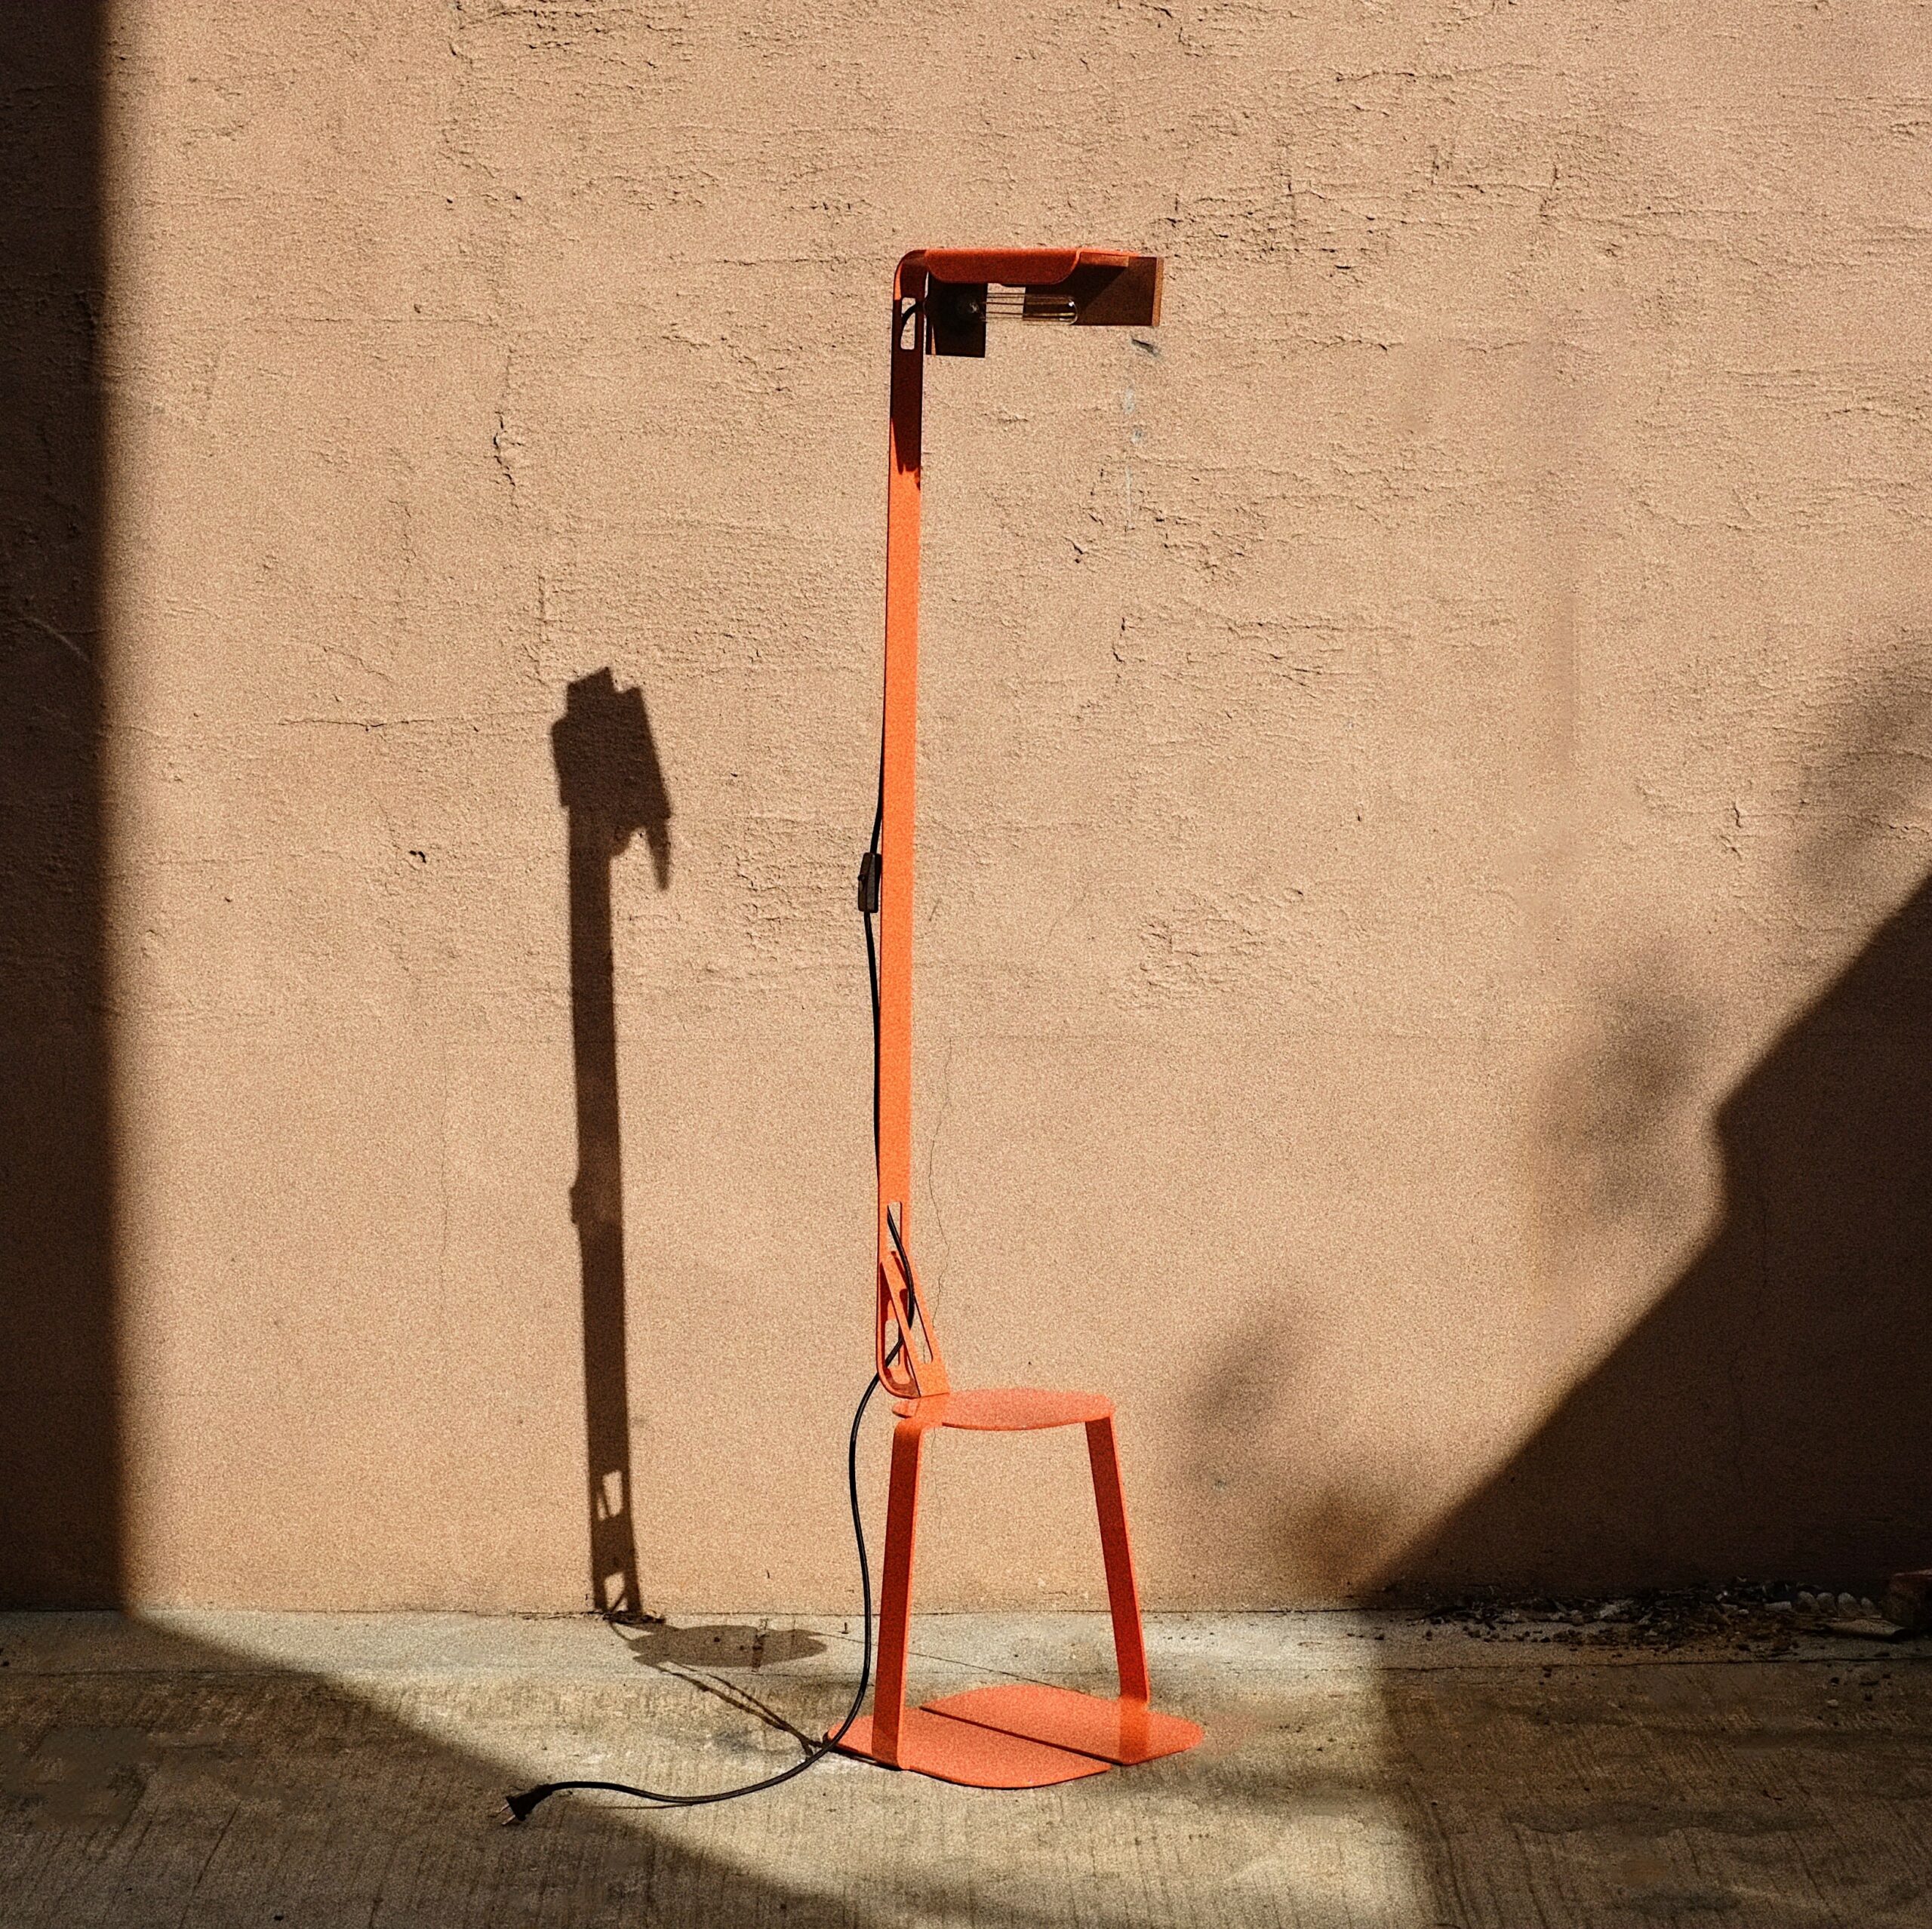 An orange metal stool sits on concrete outdoors. A pole extends from the stool, and ends in an overhang which contains a lightbulb.